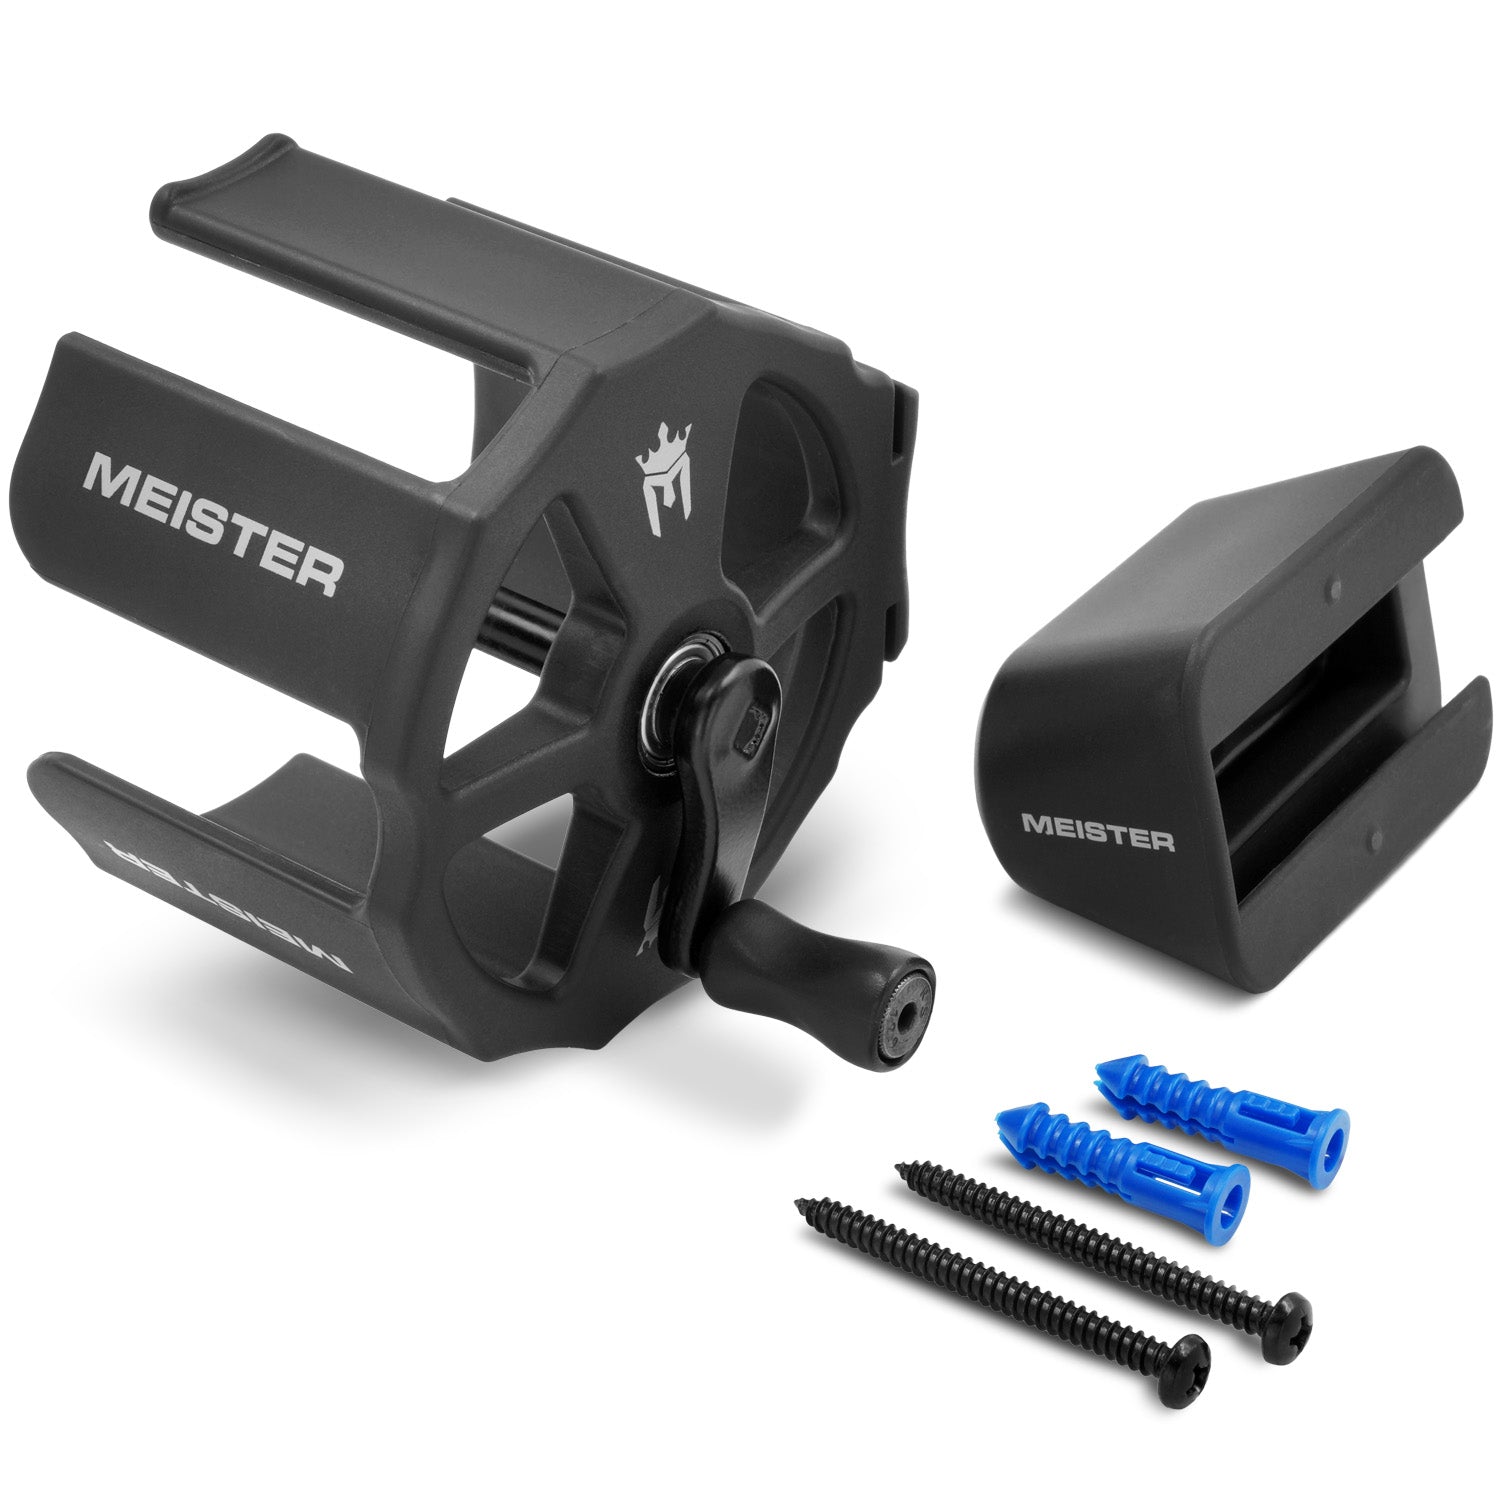 Meister Omega Portable / Mounted Hand Wrap Roller